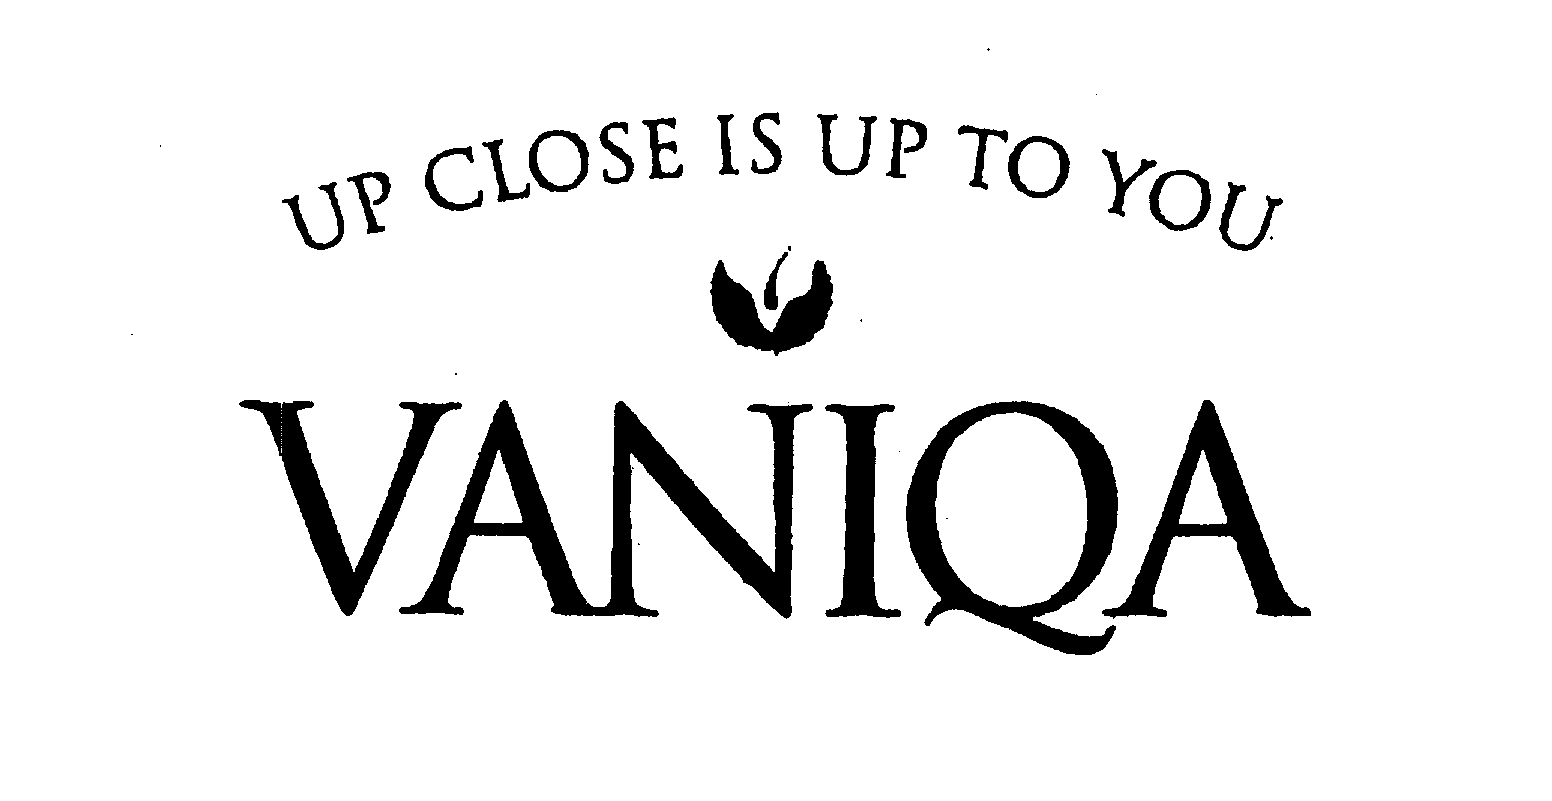 Trademark Logo UP CLOSE IS UP TO YOU VANIQA